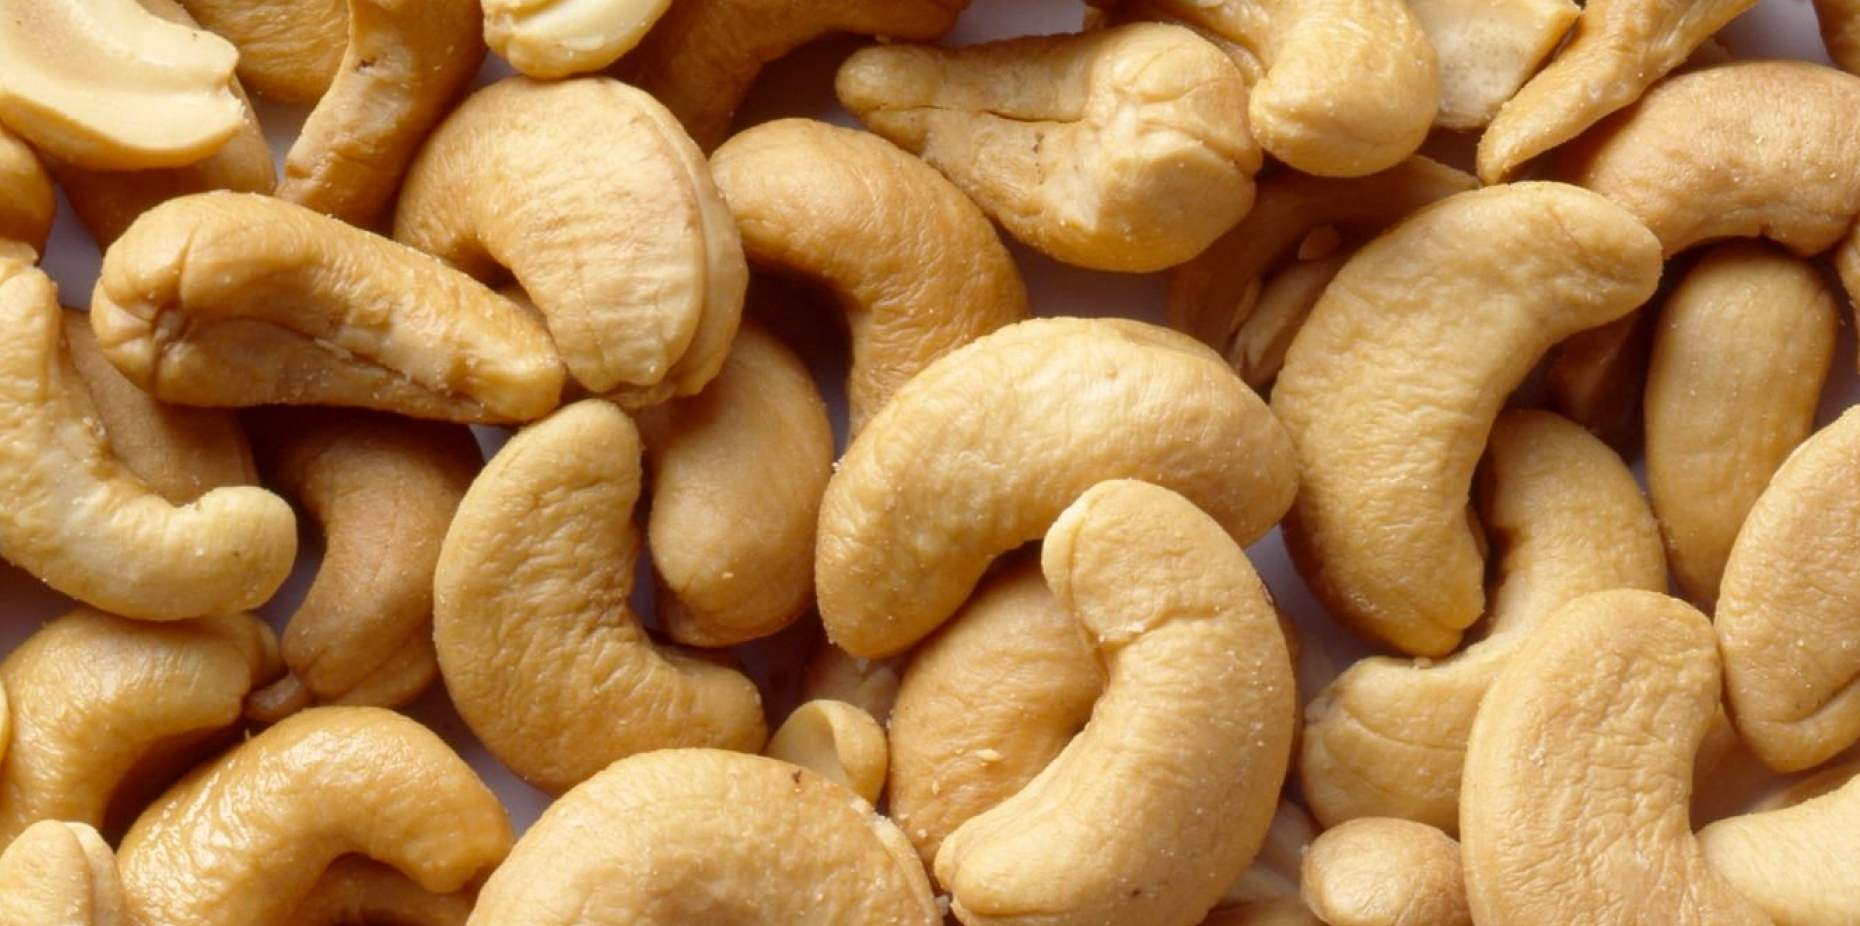 Cashews: Facts, Nutrition, Benefits, & More